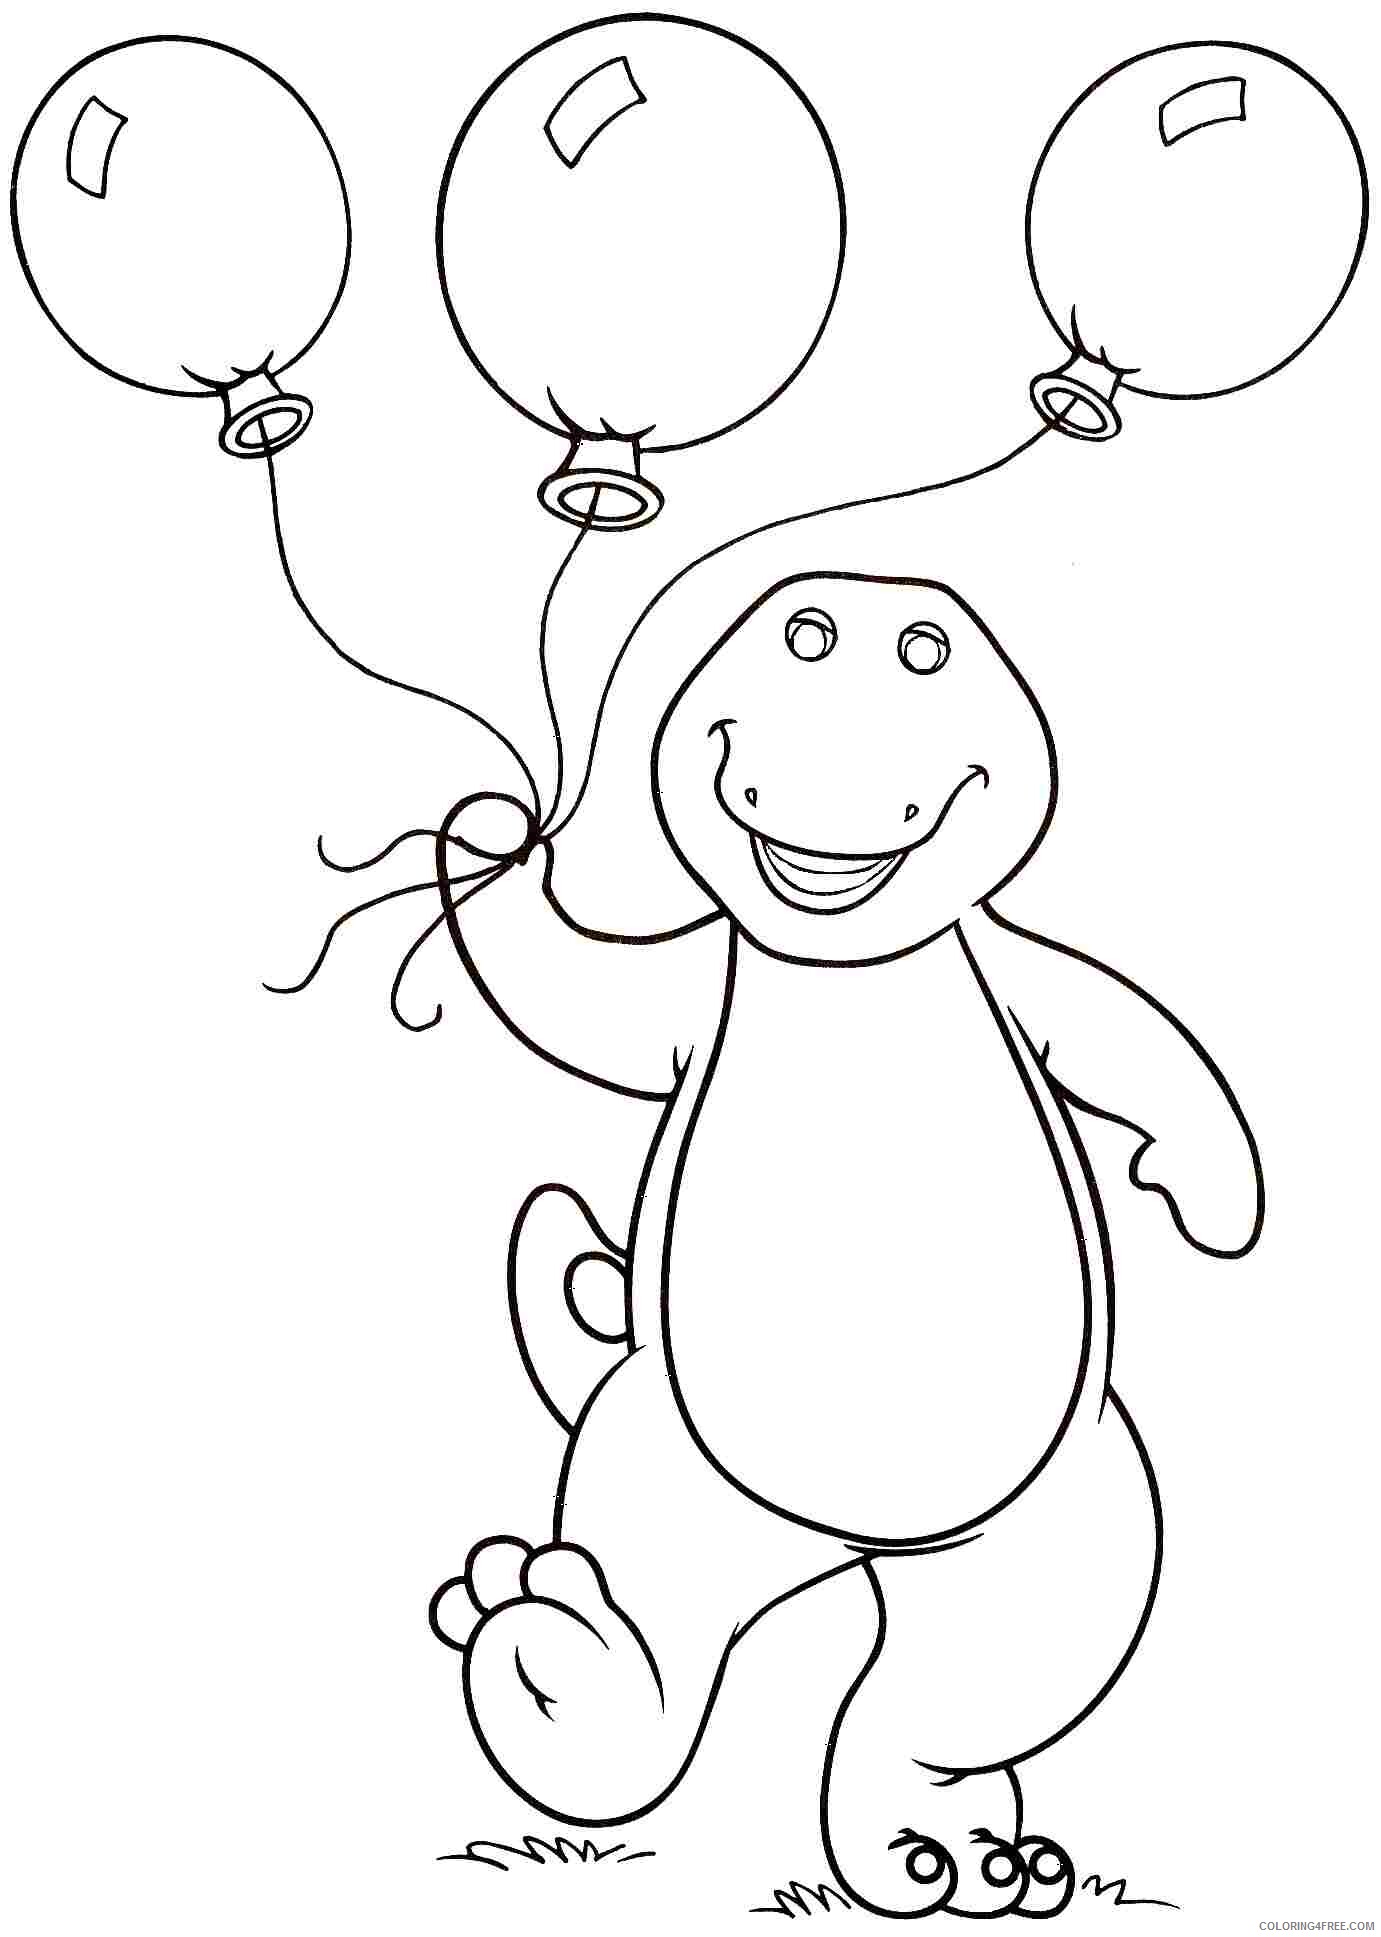 Barney and Friends Coloring Pages TV Film Barney for Preschoolers Printable 2020 00666 Coloring4free